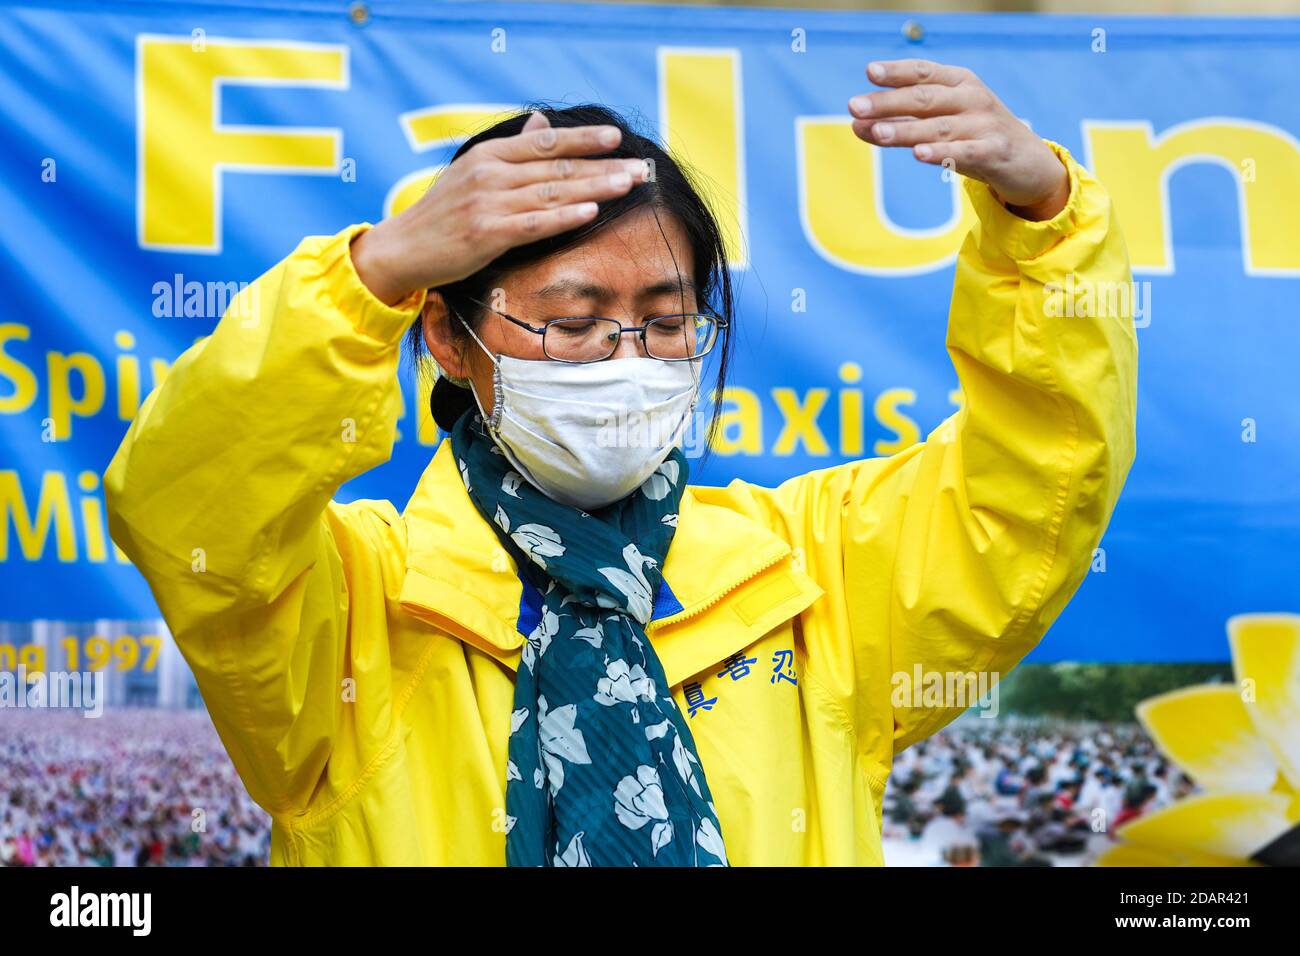 Dortmund, Germany, 14th. Nov. 2020: A woman practicing Falun Gong meditation with face mask during a protest against persecution of Falun Gong followers in China Stock Photo